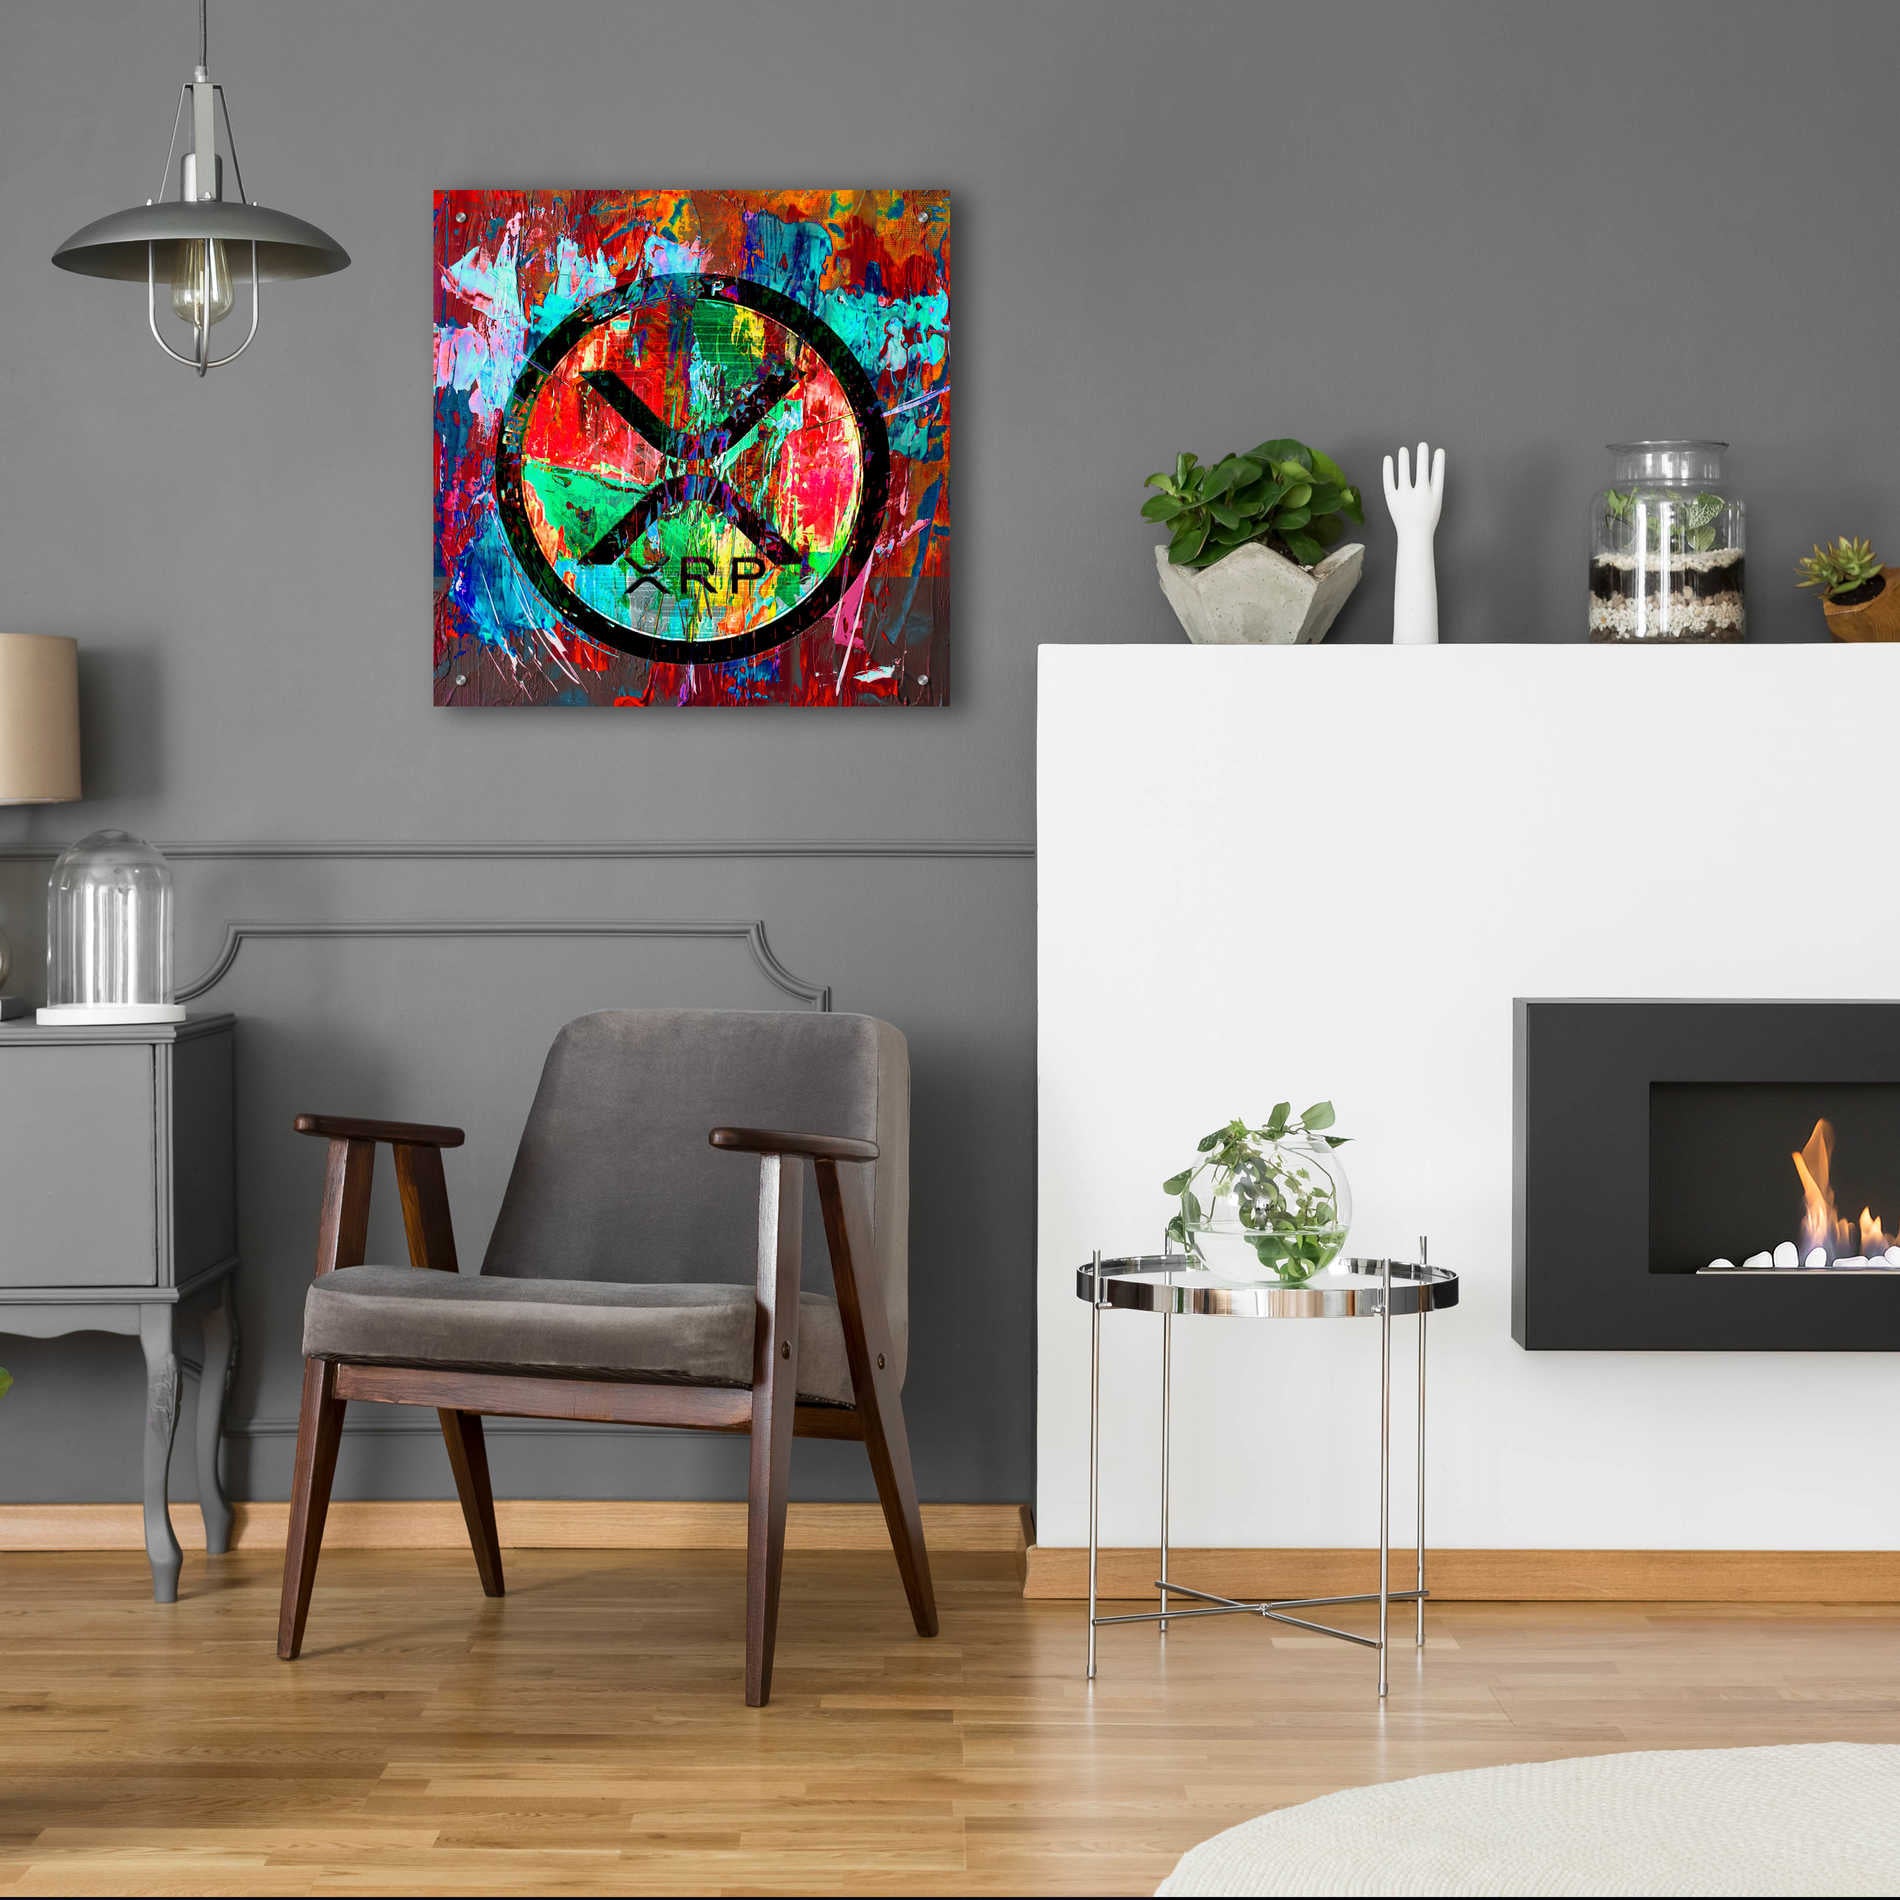 Epic Art 'Xrp Crypto In Color' by Epic Art Portfolio, Acrylic Glass Wall Art,24x24